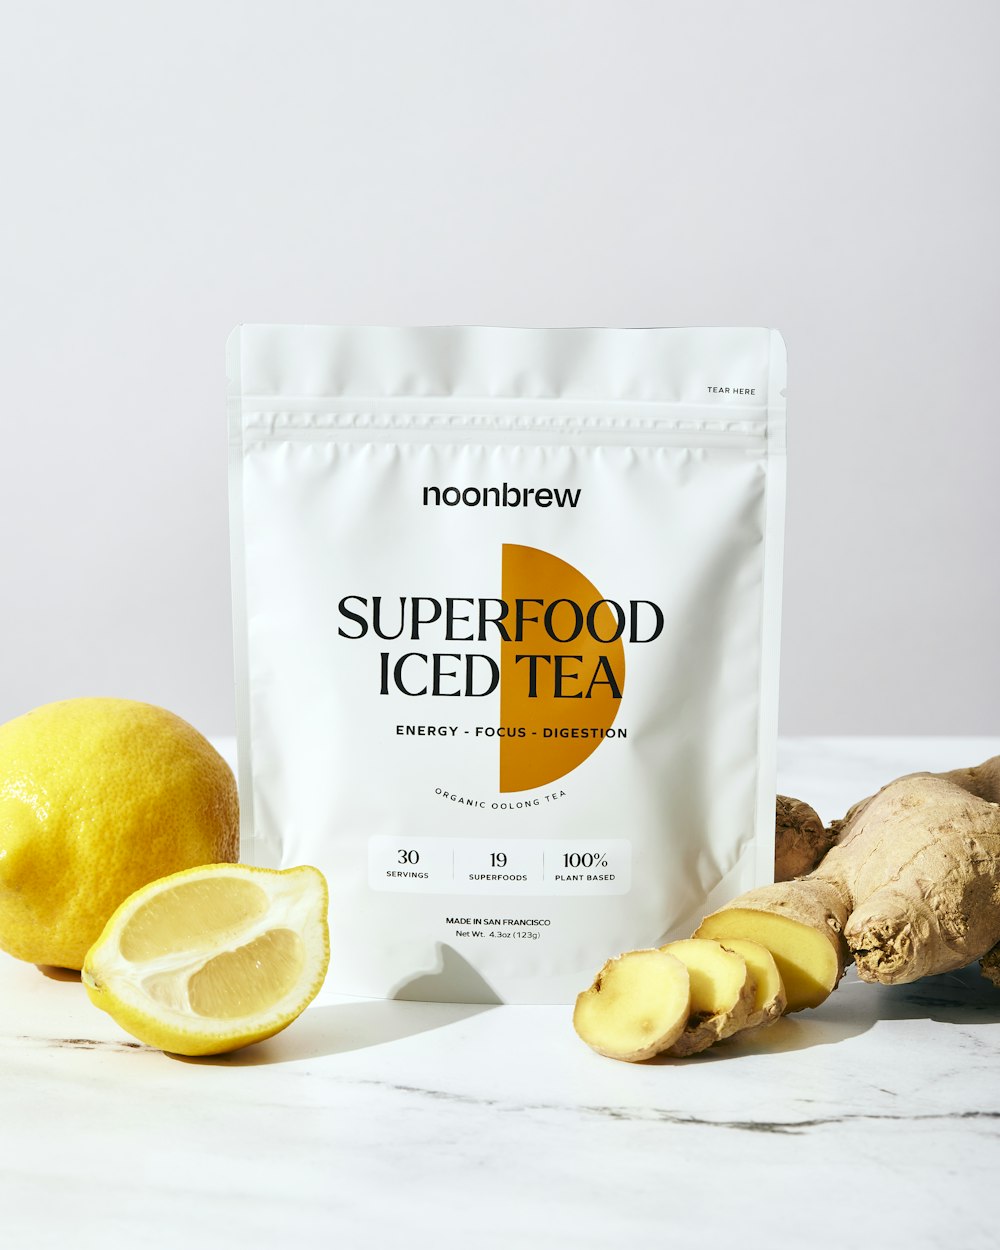 a bag of superfood iced tea next to a lemon and ginger